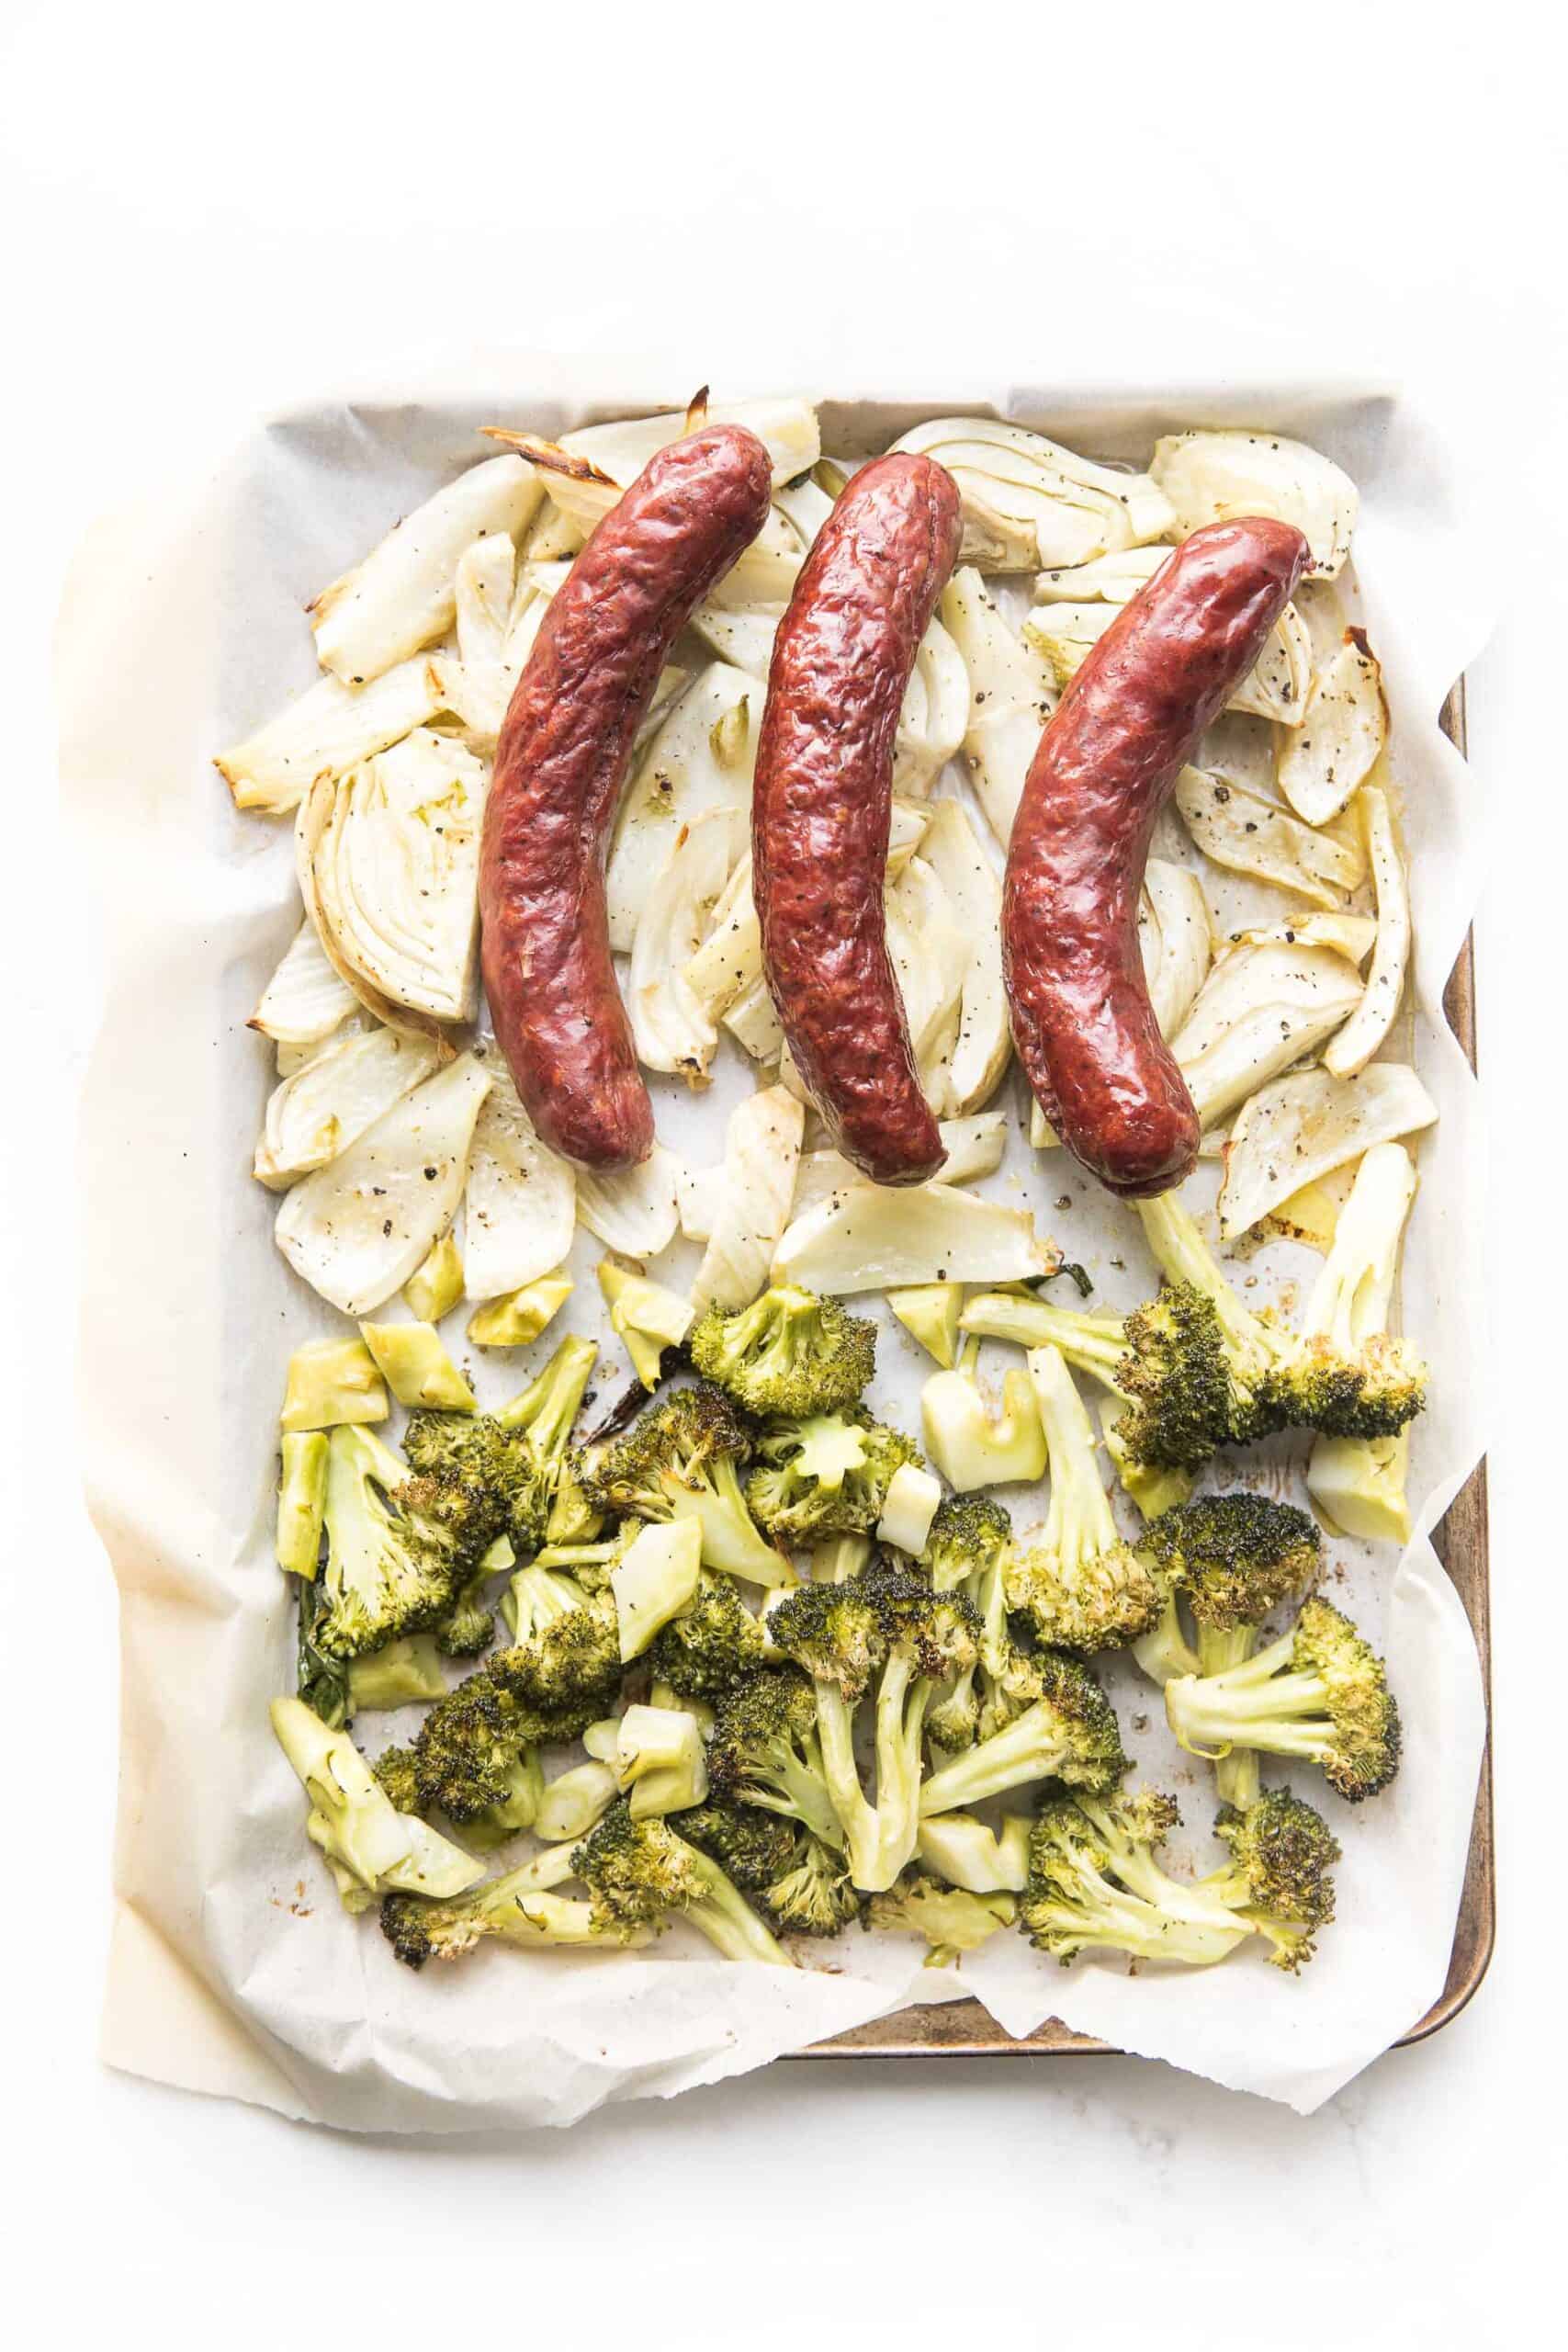 sausage, roasted fennel and broccoli on a sheet pan and white background